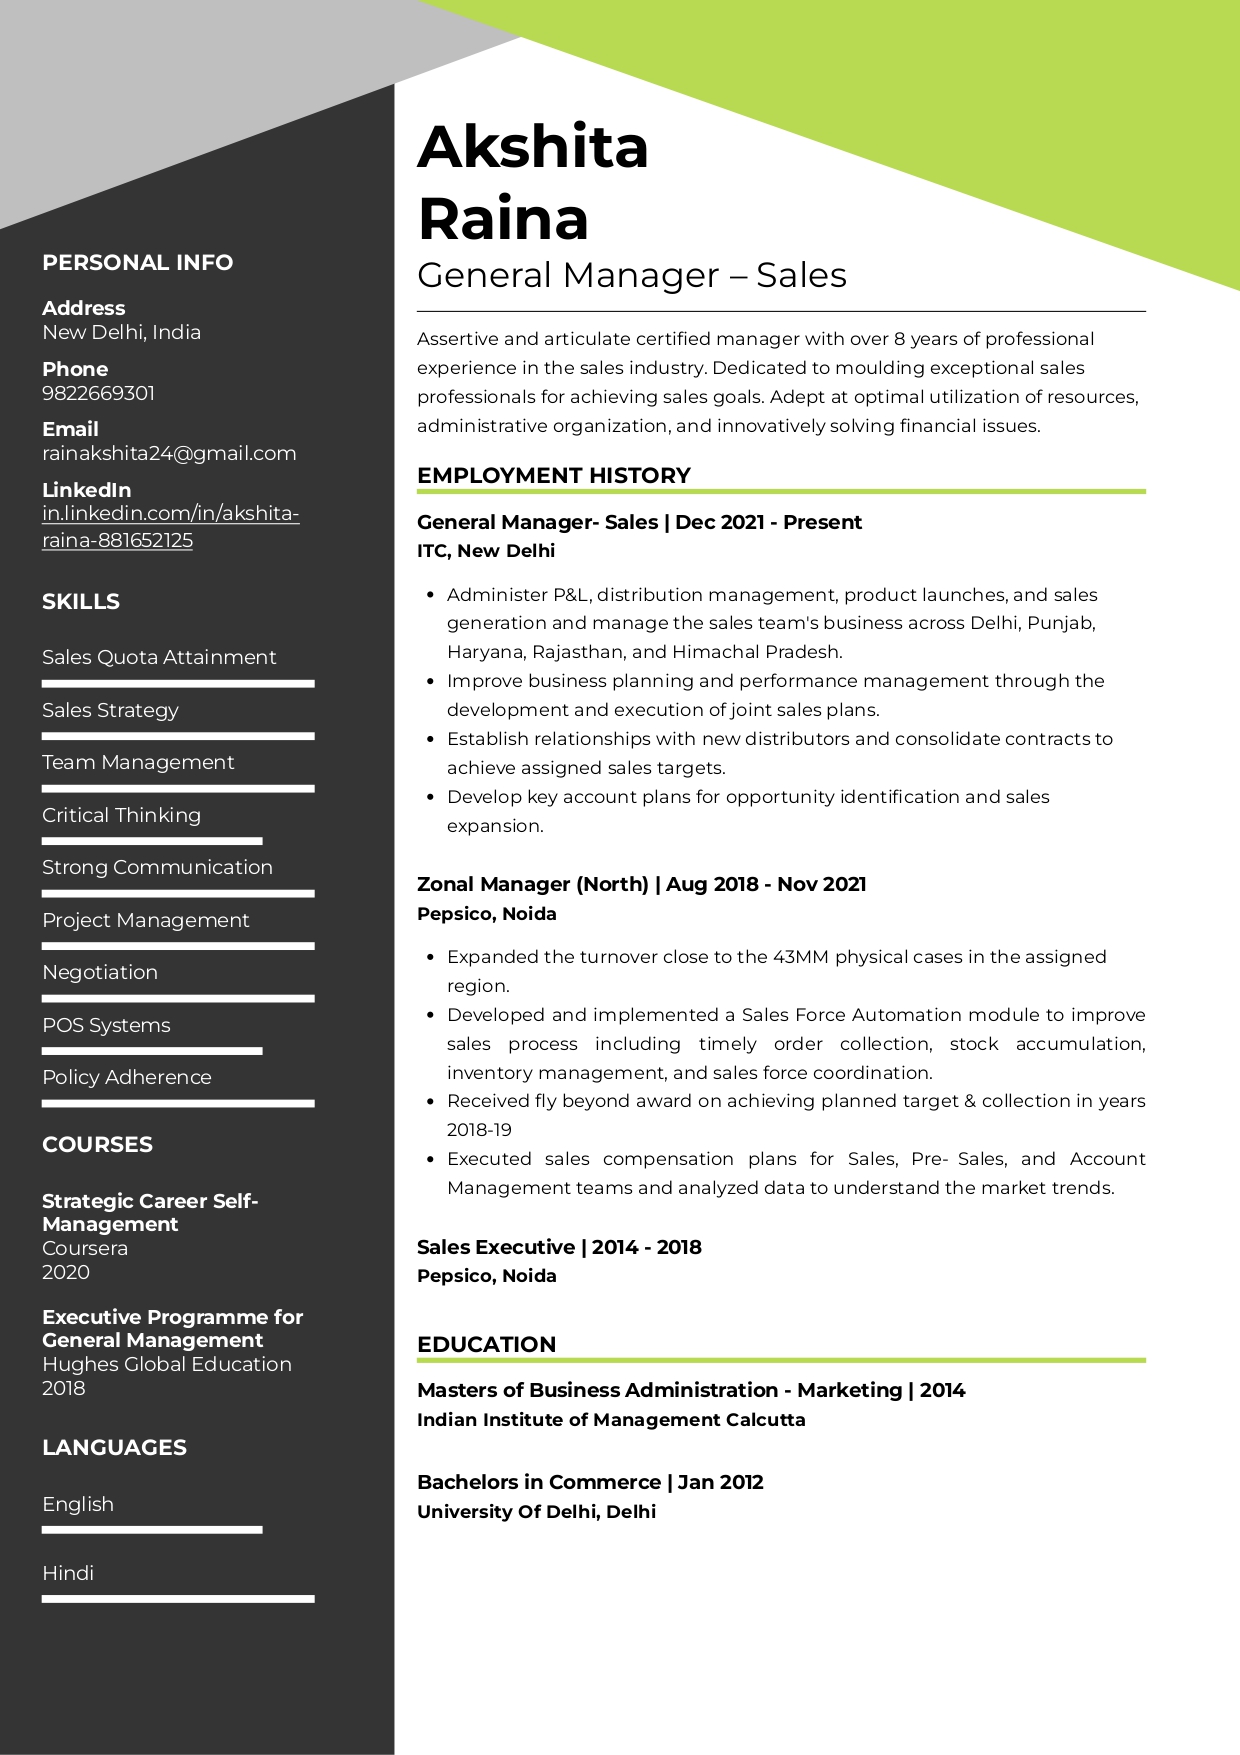 General Manager - Sales